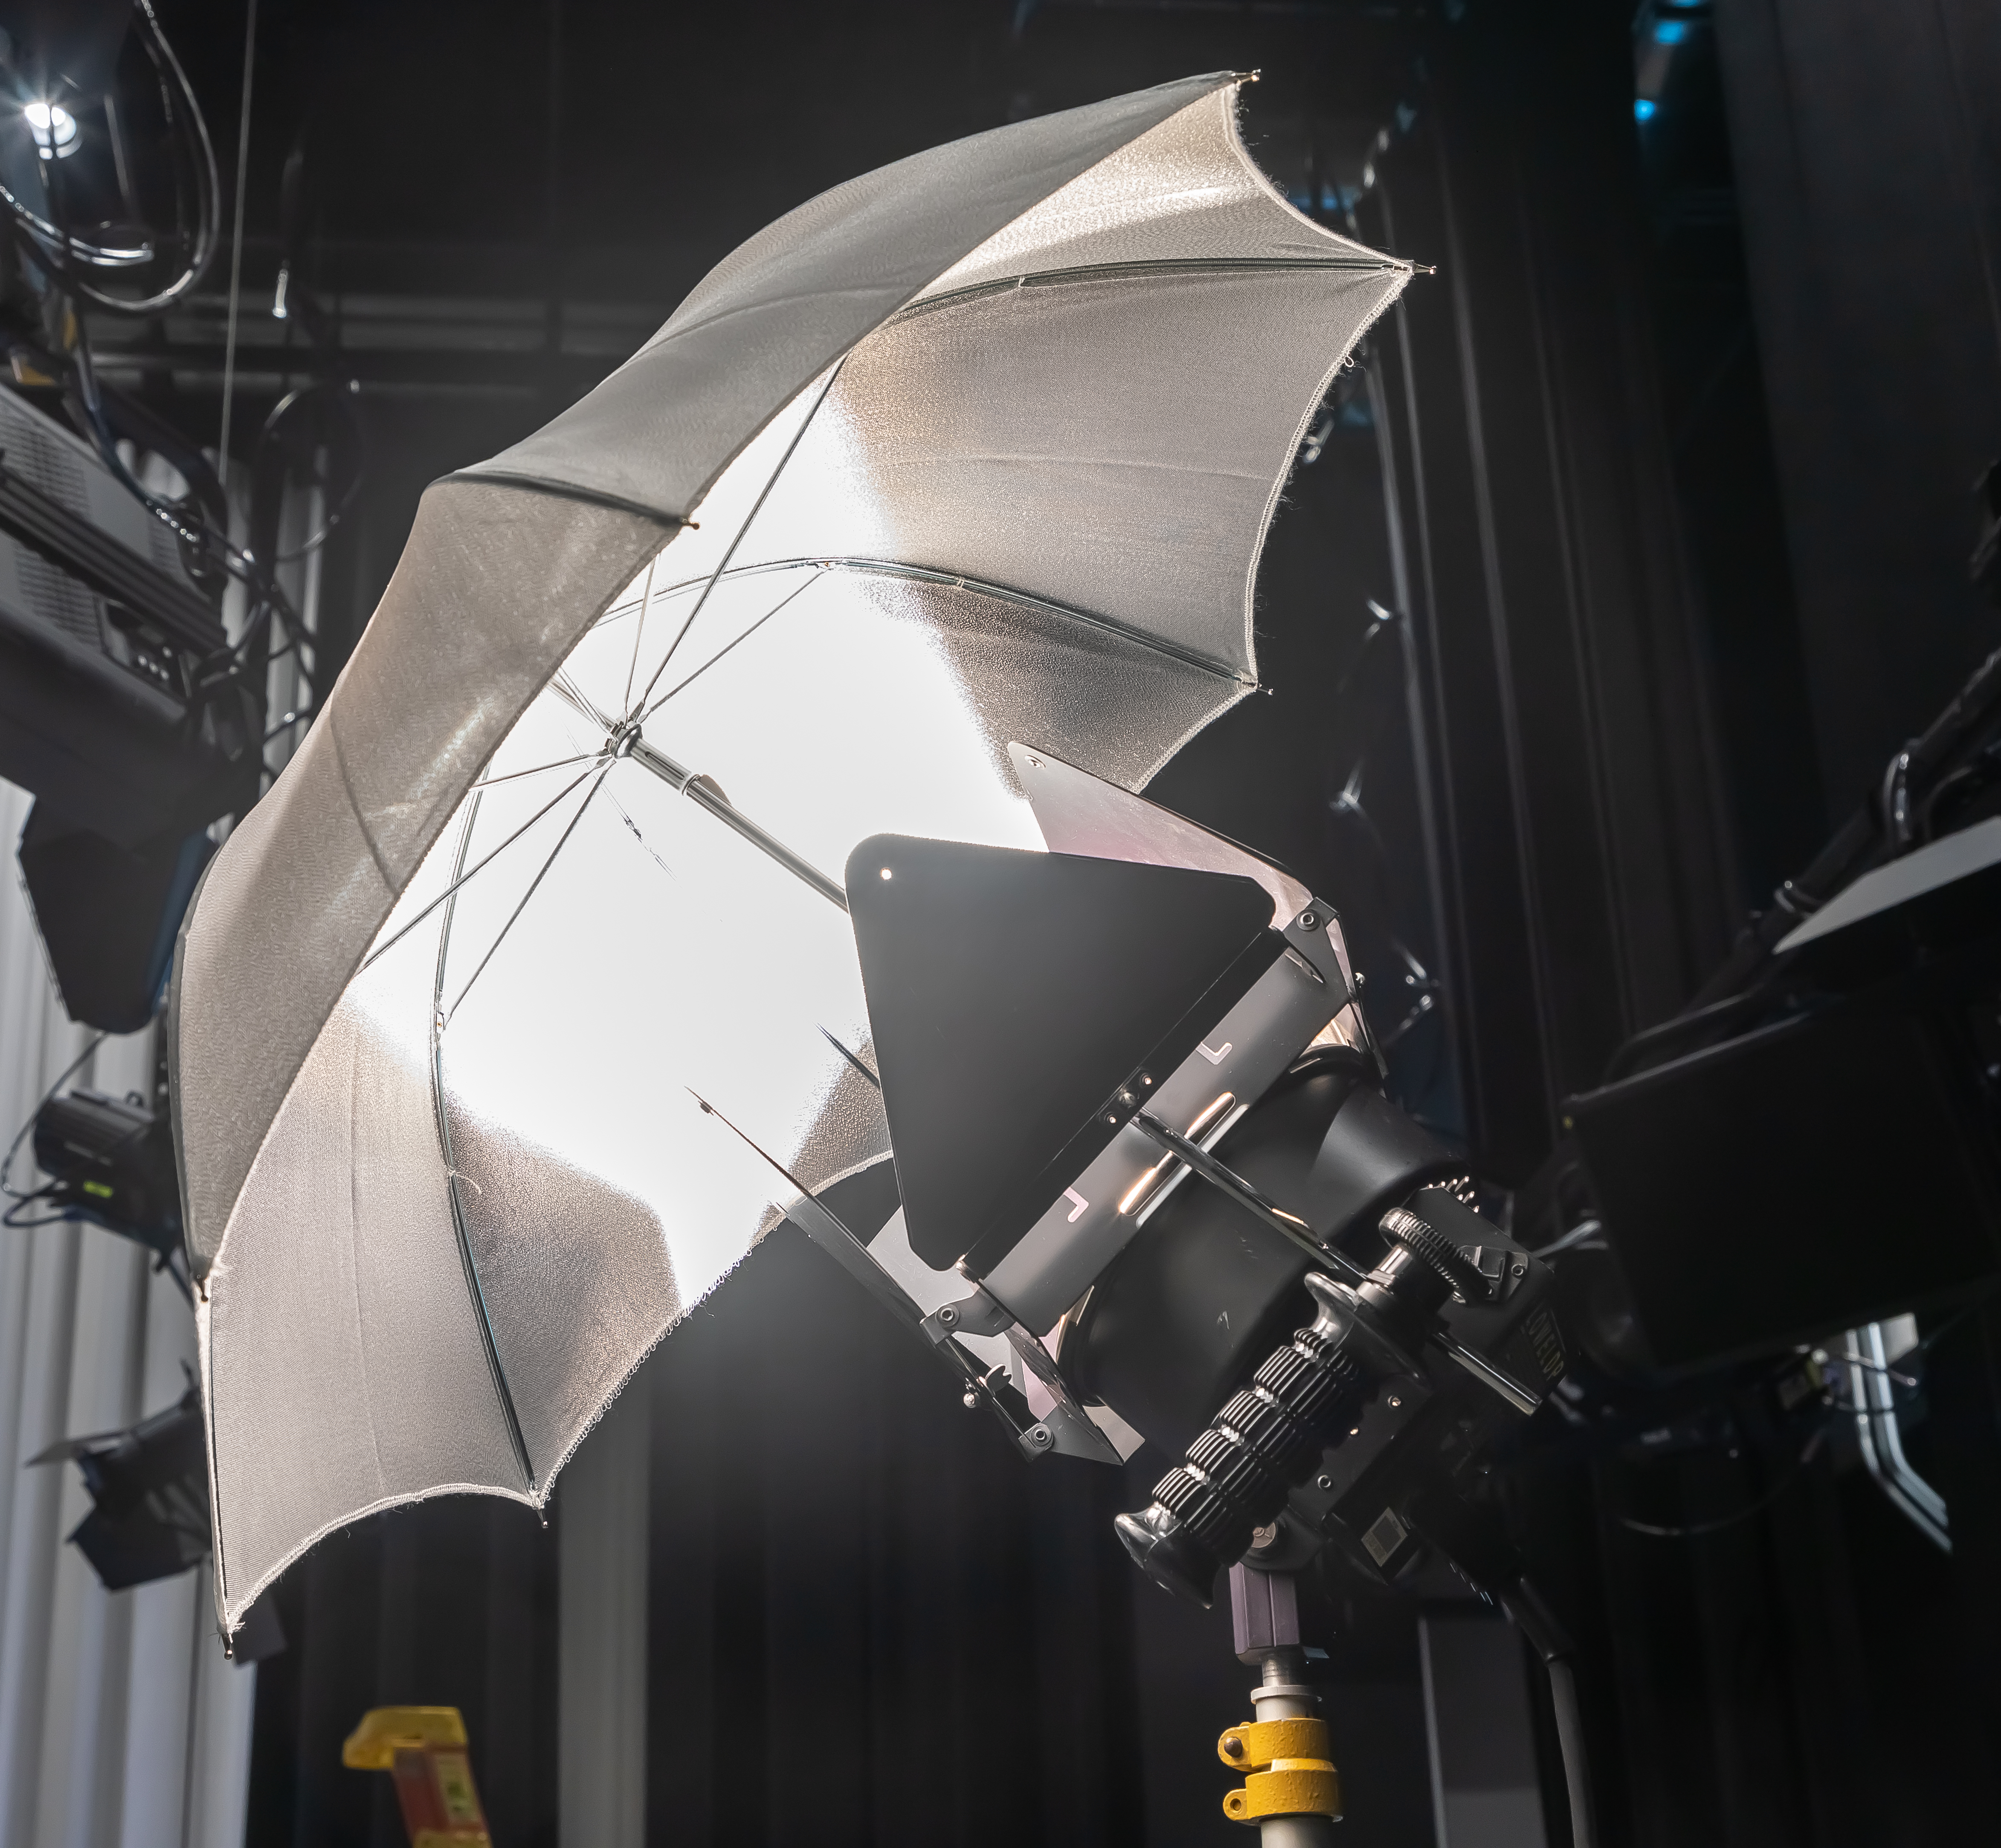 A fresnel light shining light into an attached umbrella that has reflective material inside. 